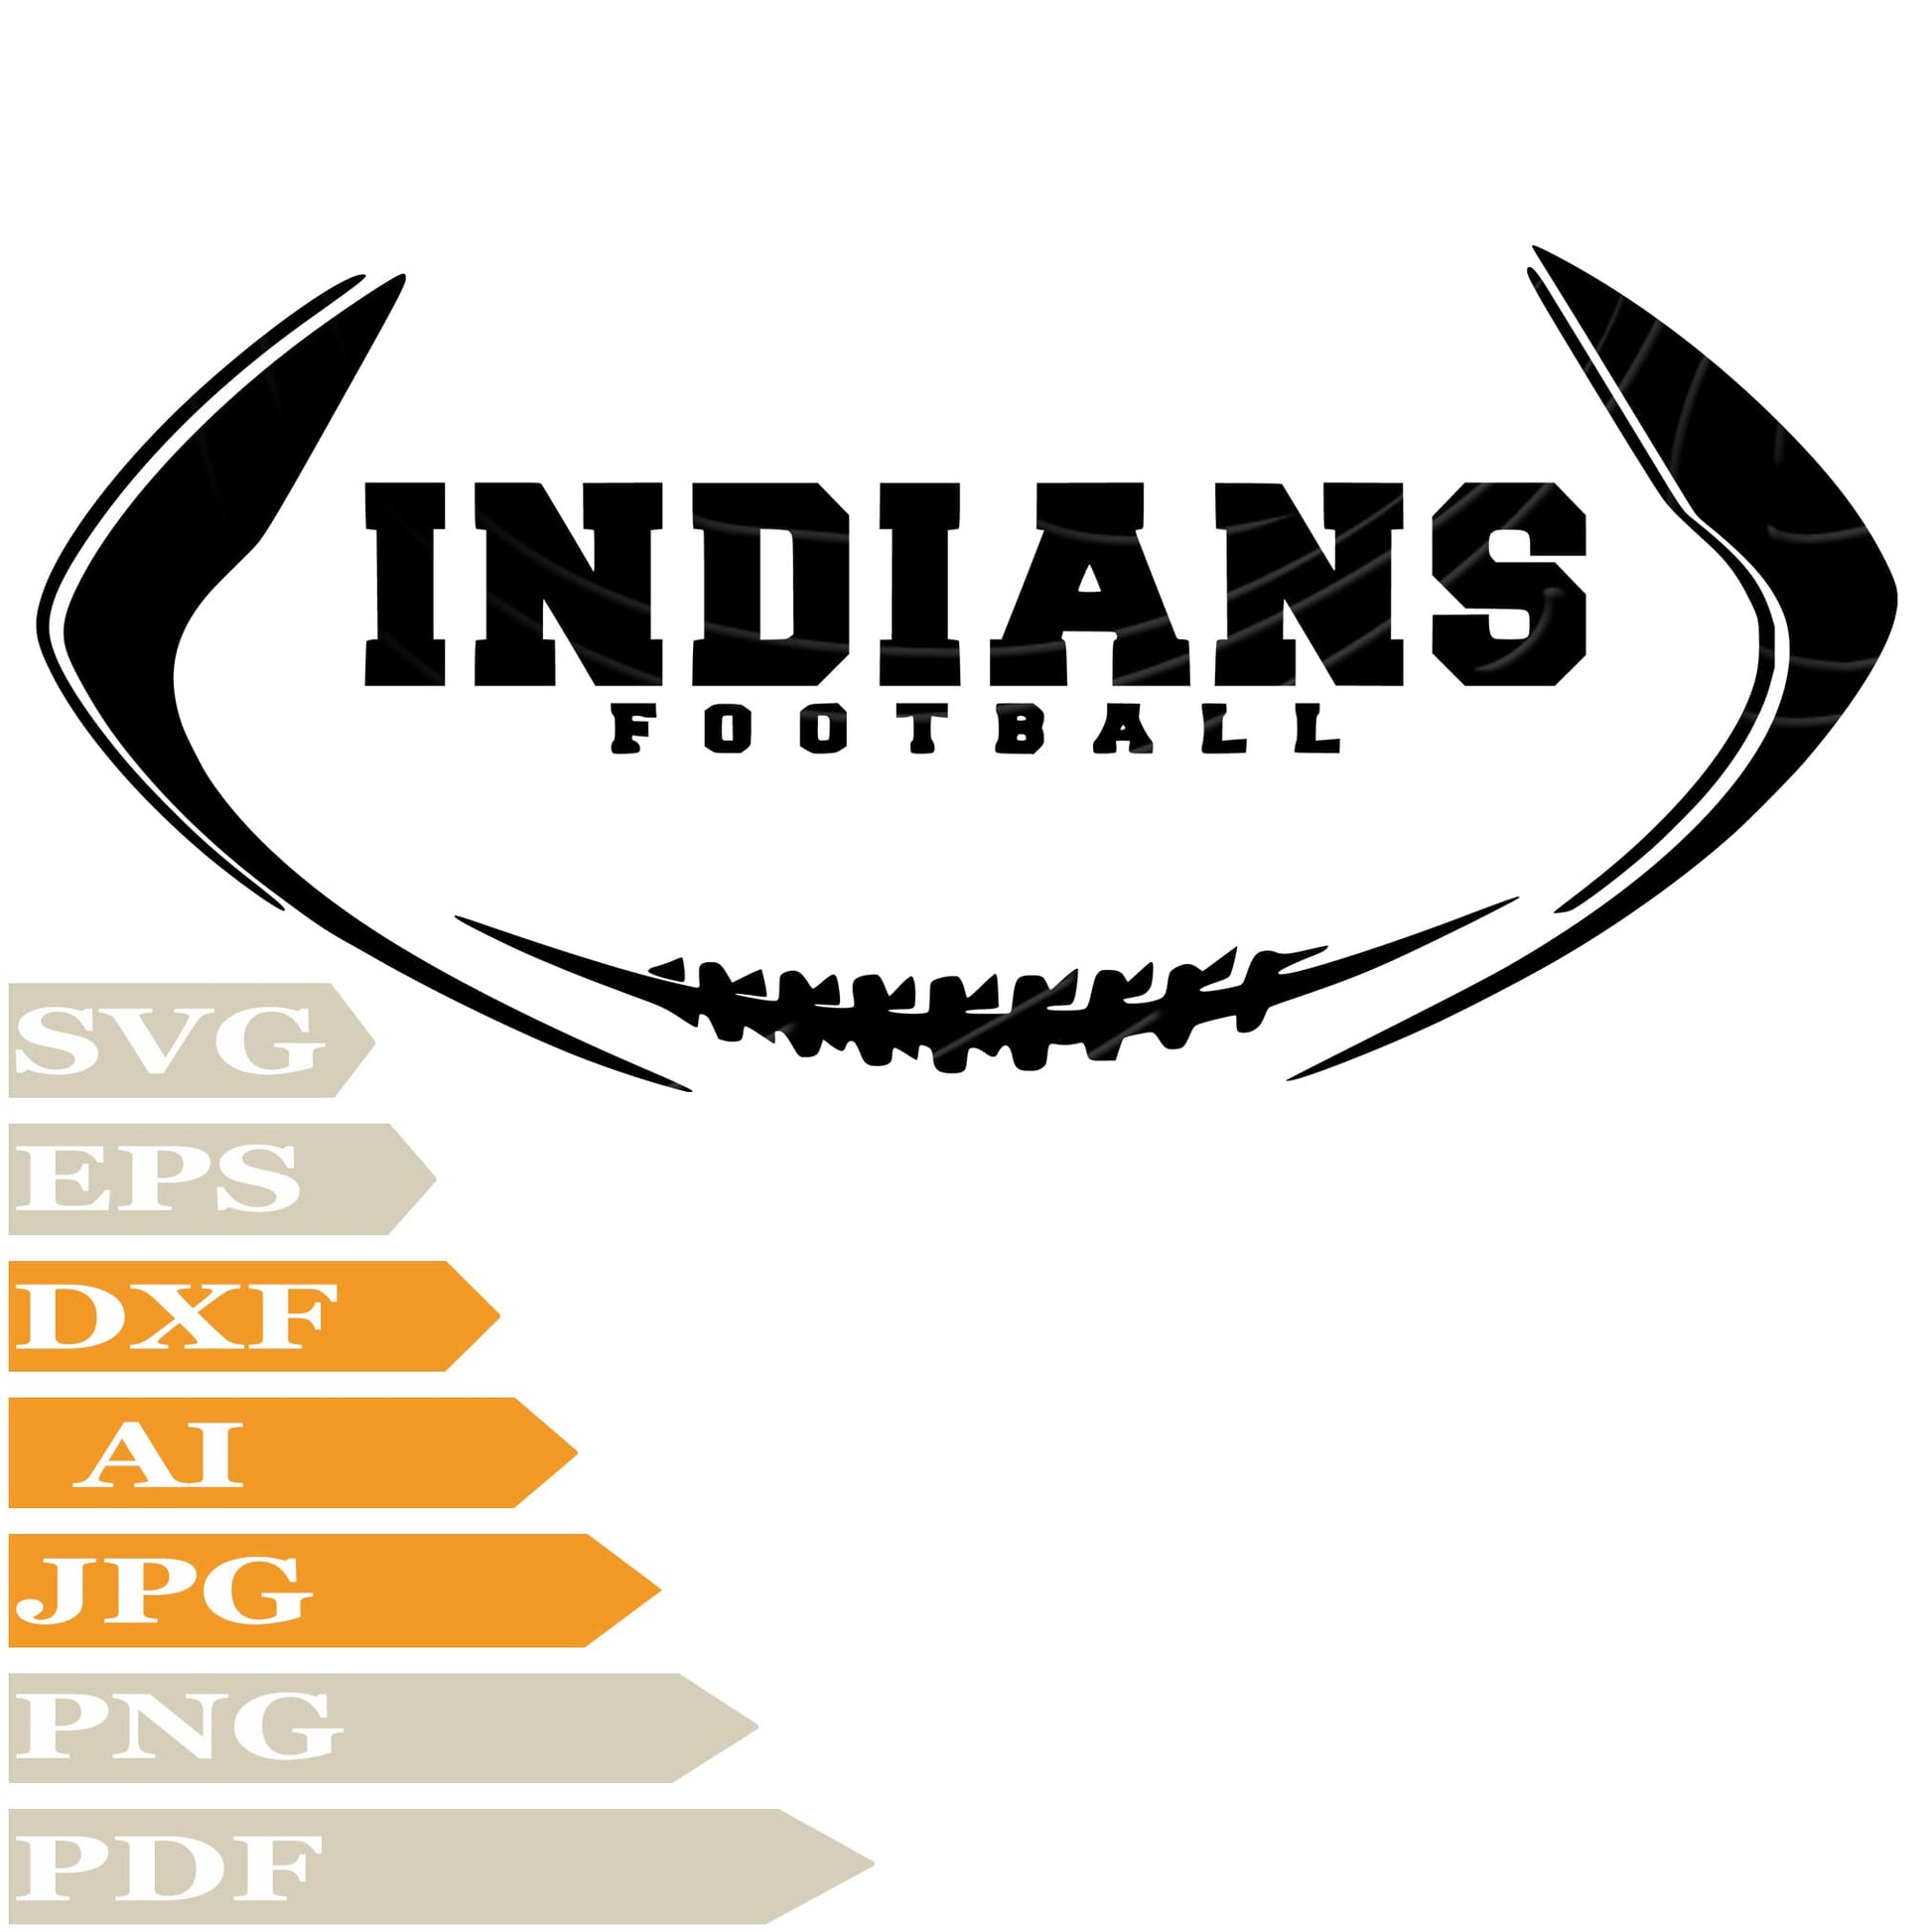 Sofvintage-Indian Football Svg File,Indians Football Svg Design,American Football Svg,Indians Football Png,Indians Football Logo Vector Graphics,For Cricut,Clipart,Image Cut,T-Shirt,Wall Sticker,For Tattoo,Silhouette